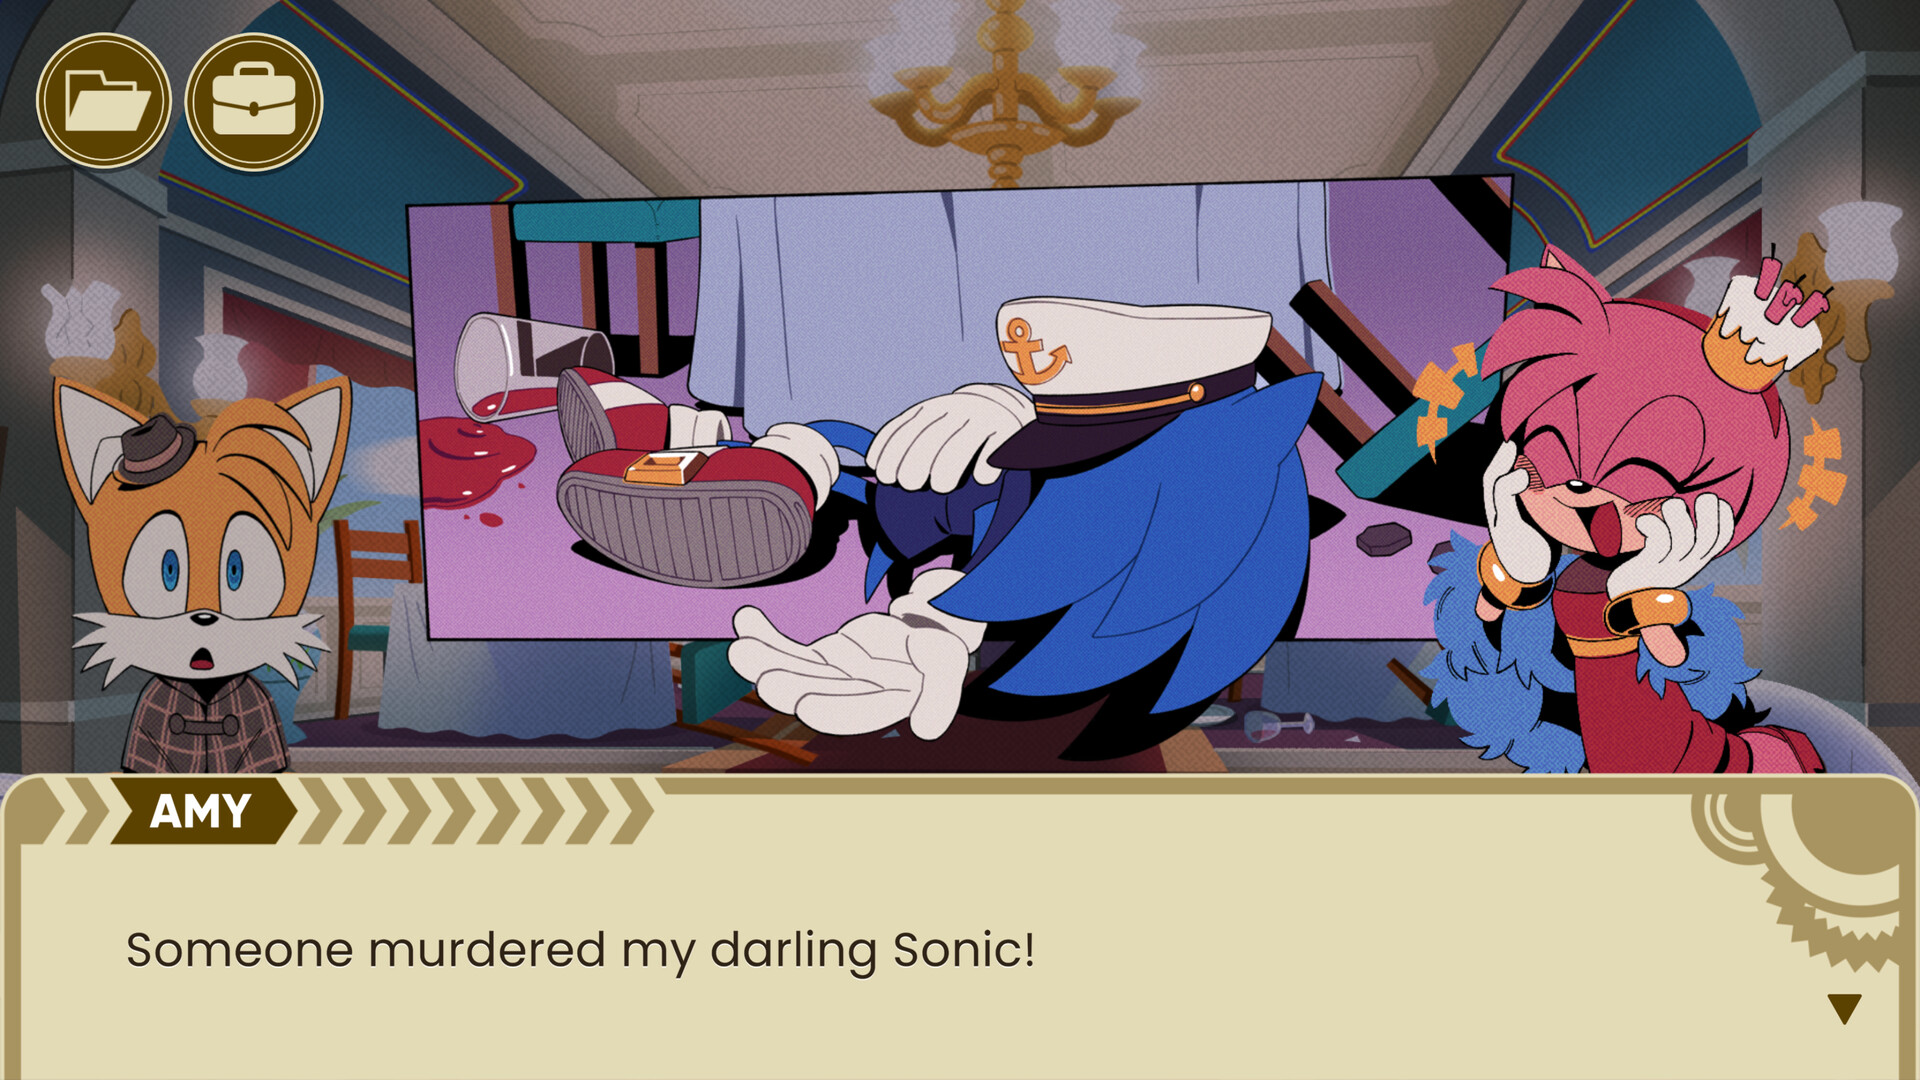 Imagem: Image result for sonic x shadow fanfiction, Sonic and shadow